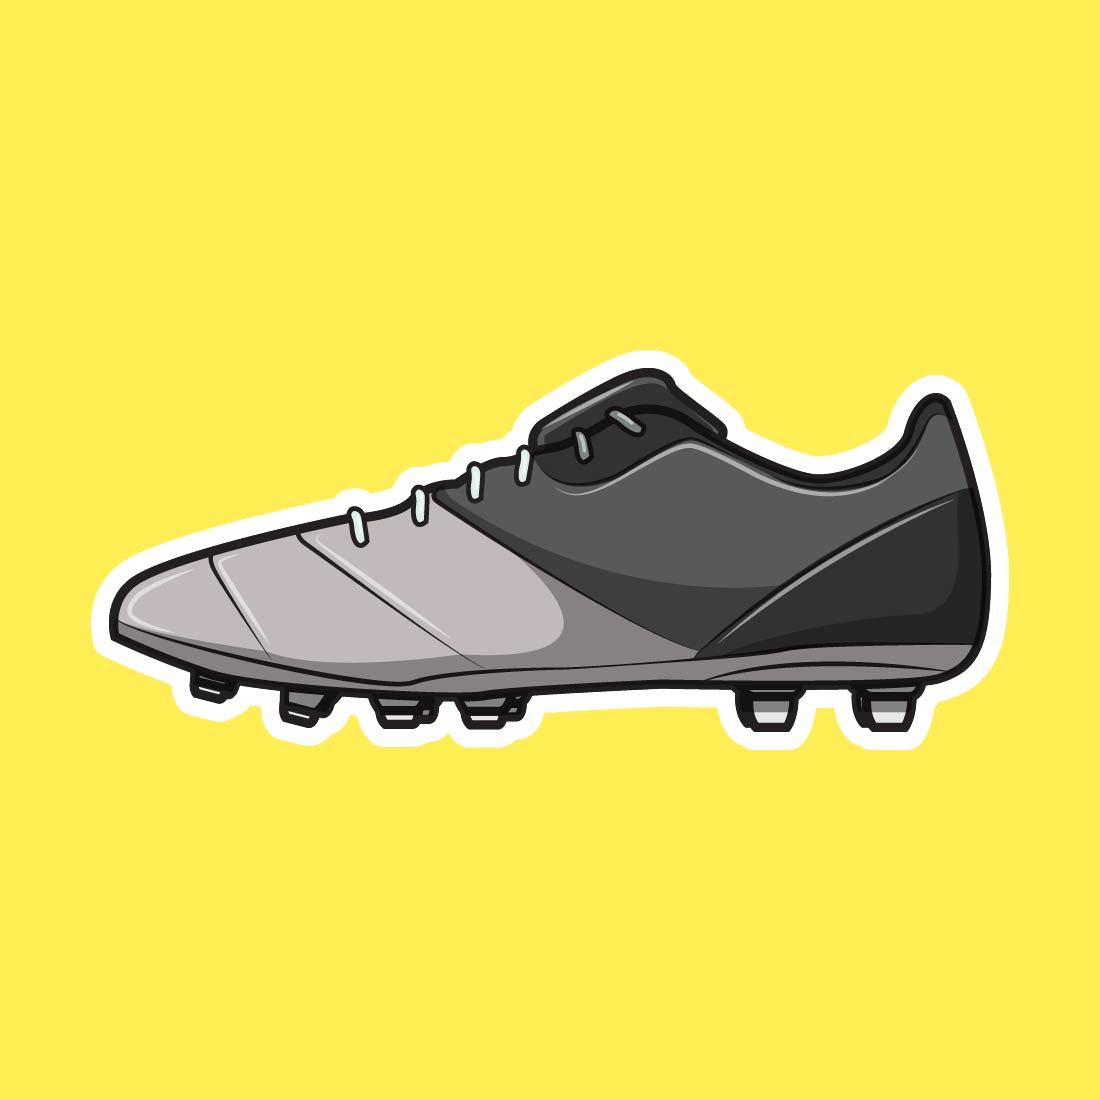 Uniquely made up soccer shoes in grey and black colors.